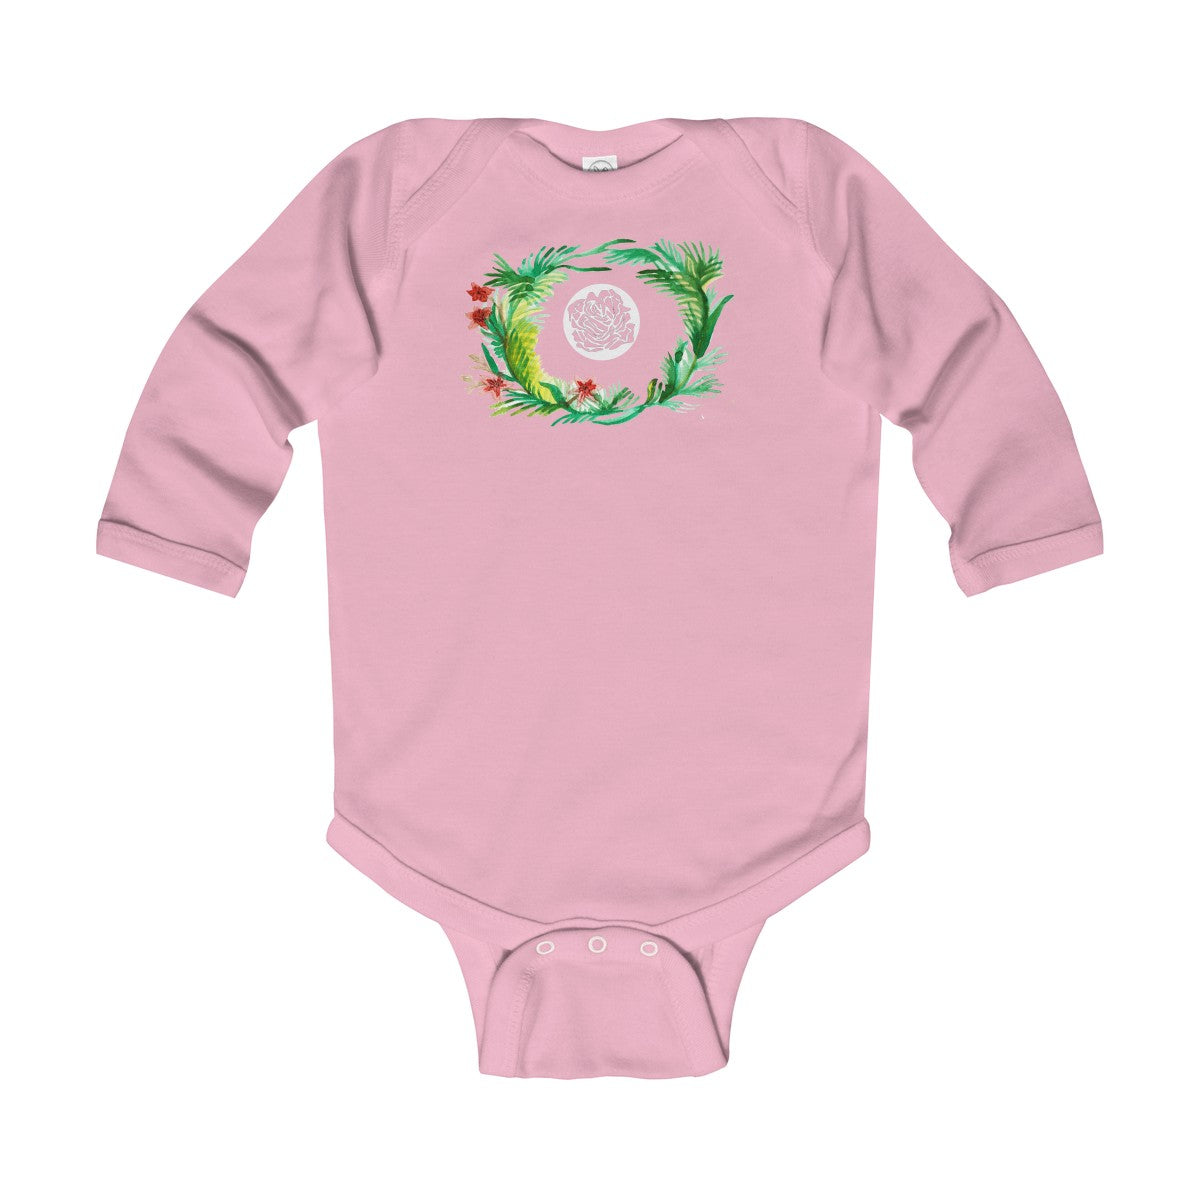 Fall Floral Print Baby's Infant Cotton Long Sleeve Bodysuit -Made in UK (UK Size: 6M-24M)-Kids clothes-Pink-18M-Heidi Kimura Art LLC